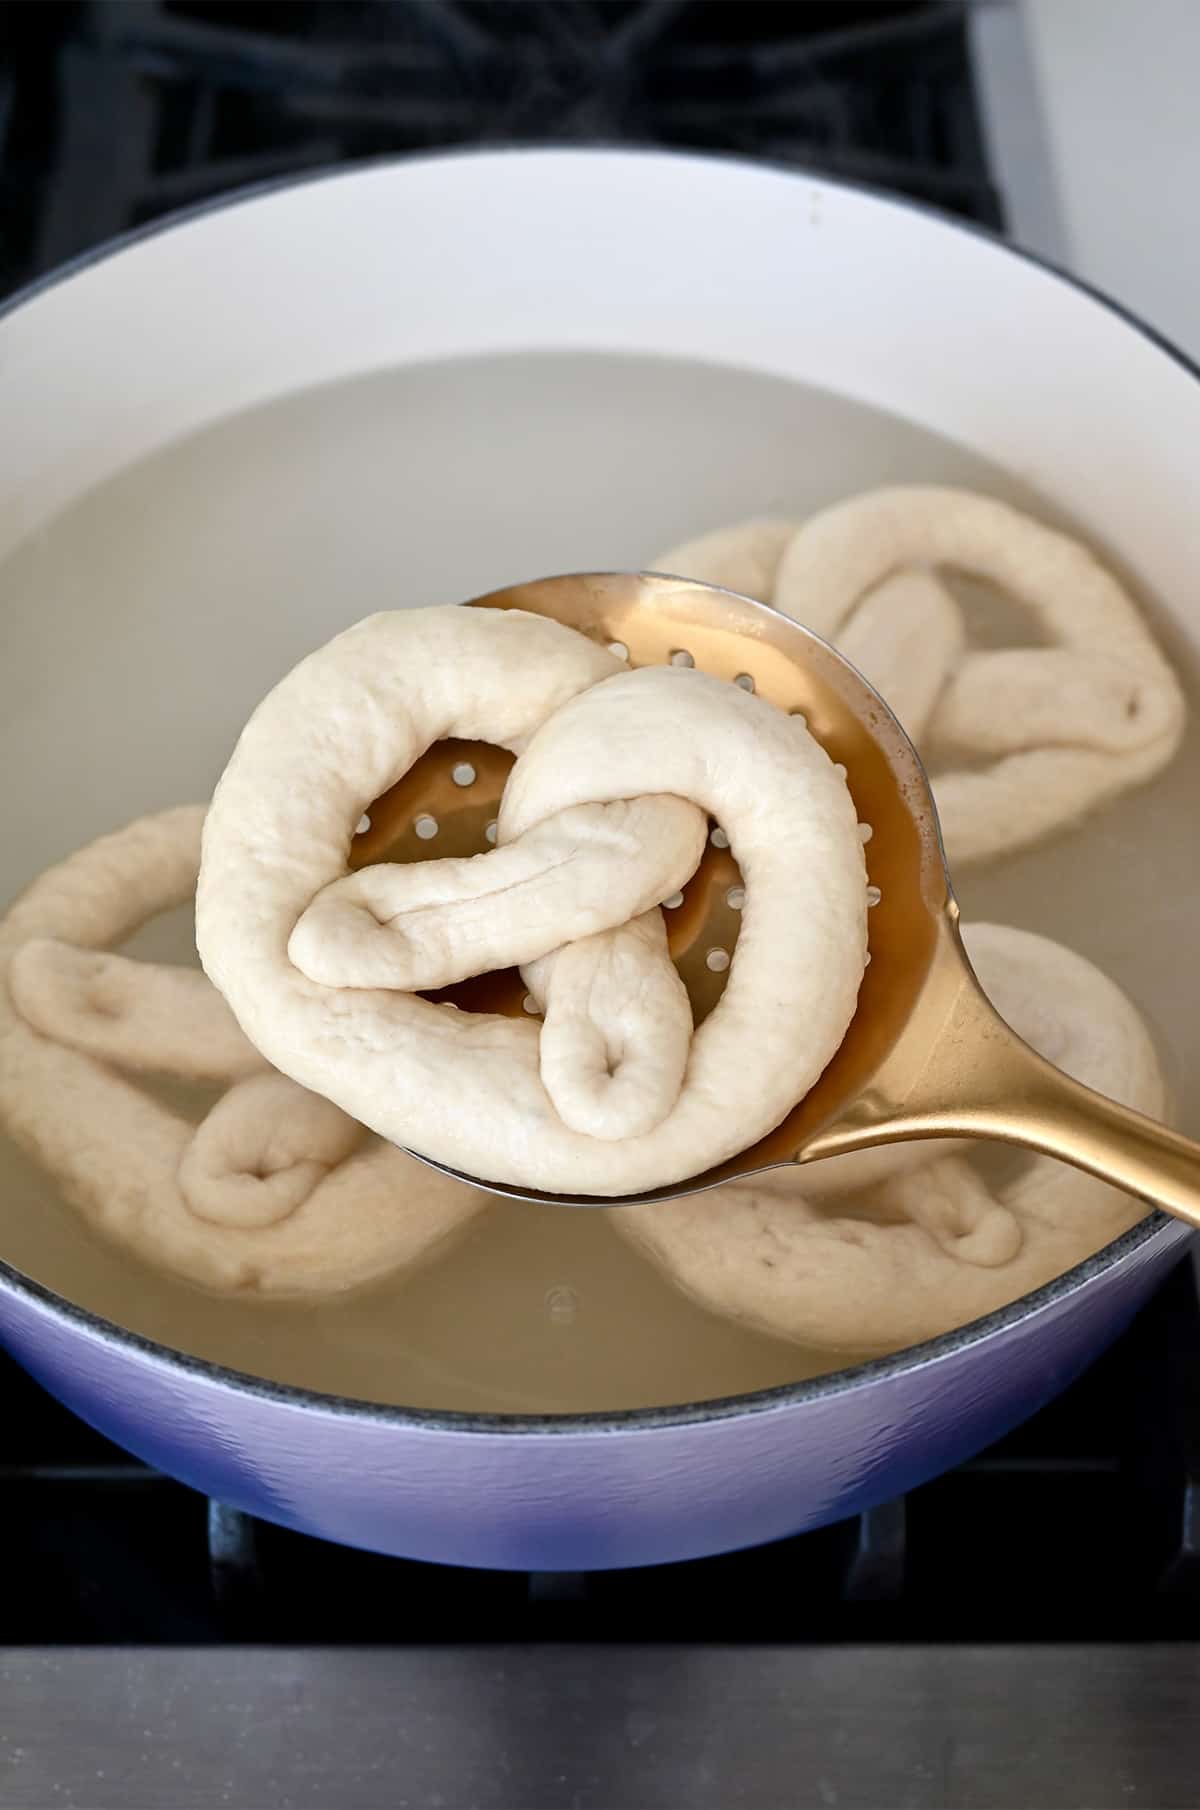 A slotted spoon with an unbaked pretzel over a Dutch oven containing a baking soda bath.